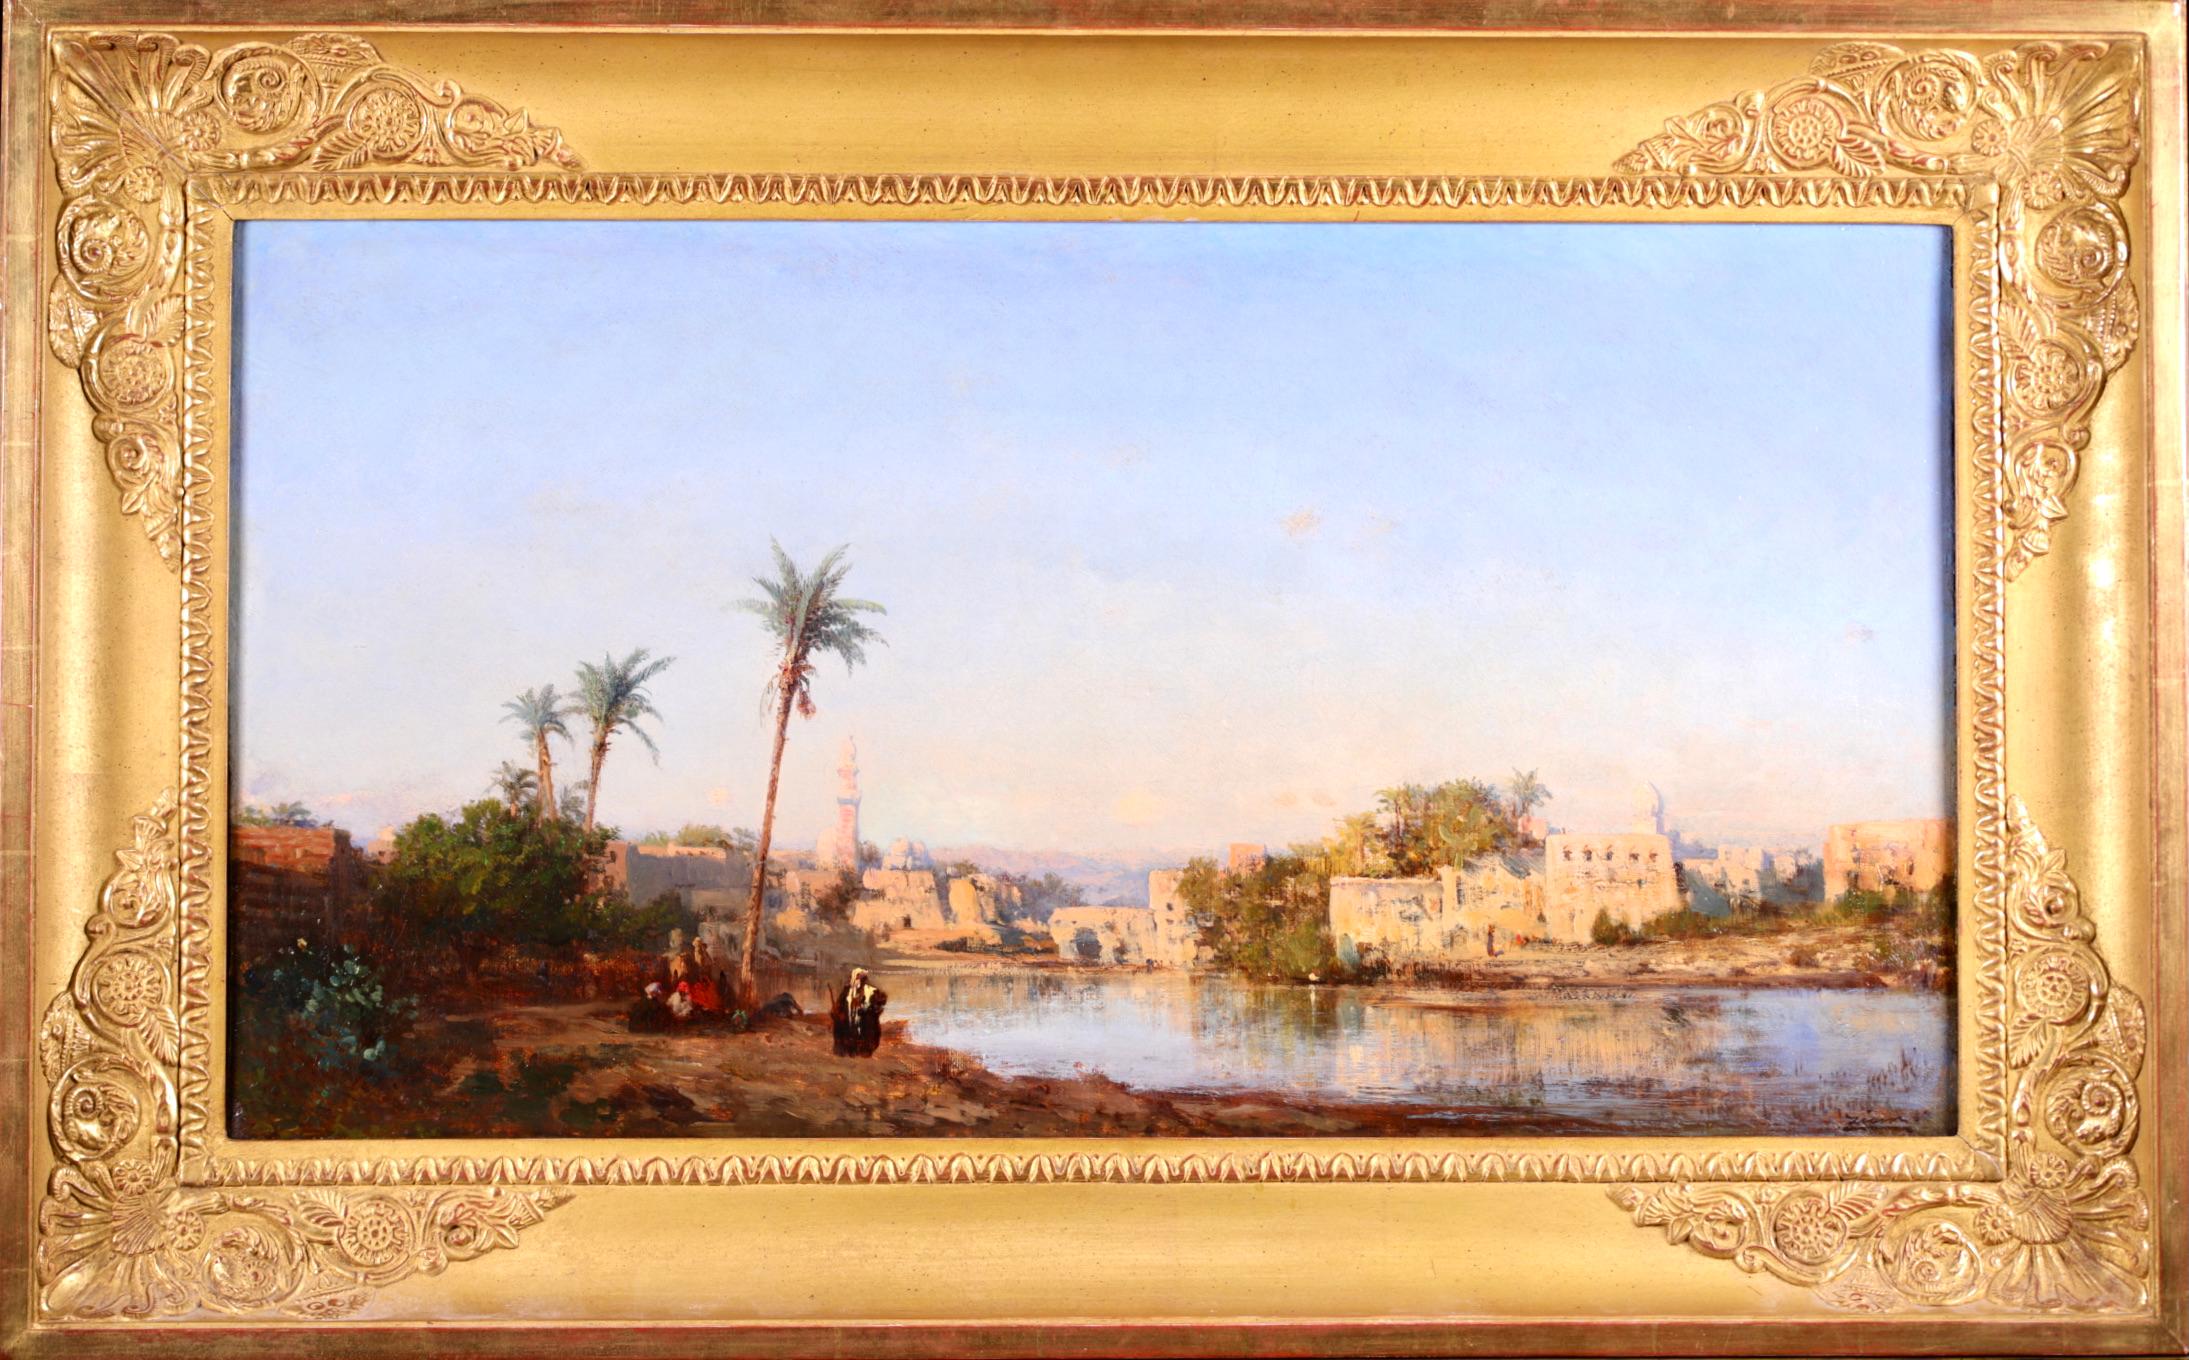 Signed orientalist landscape oil on canvas circa 1875 by French impressionist painter Felix Francois Georges Philbert Ziem. The work depicts a view of a town beside the River Nile. A very rare early work by Ziem painted during his year long trip to